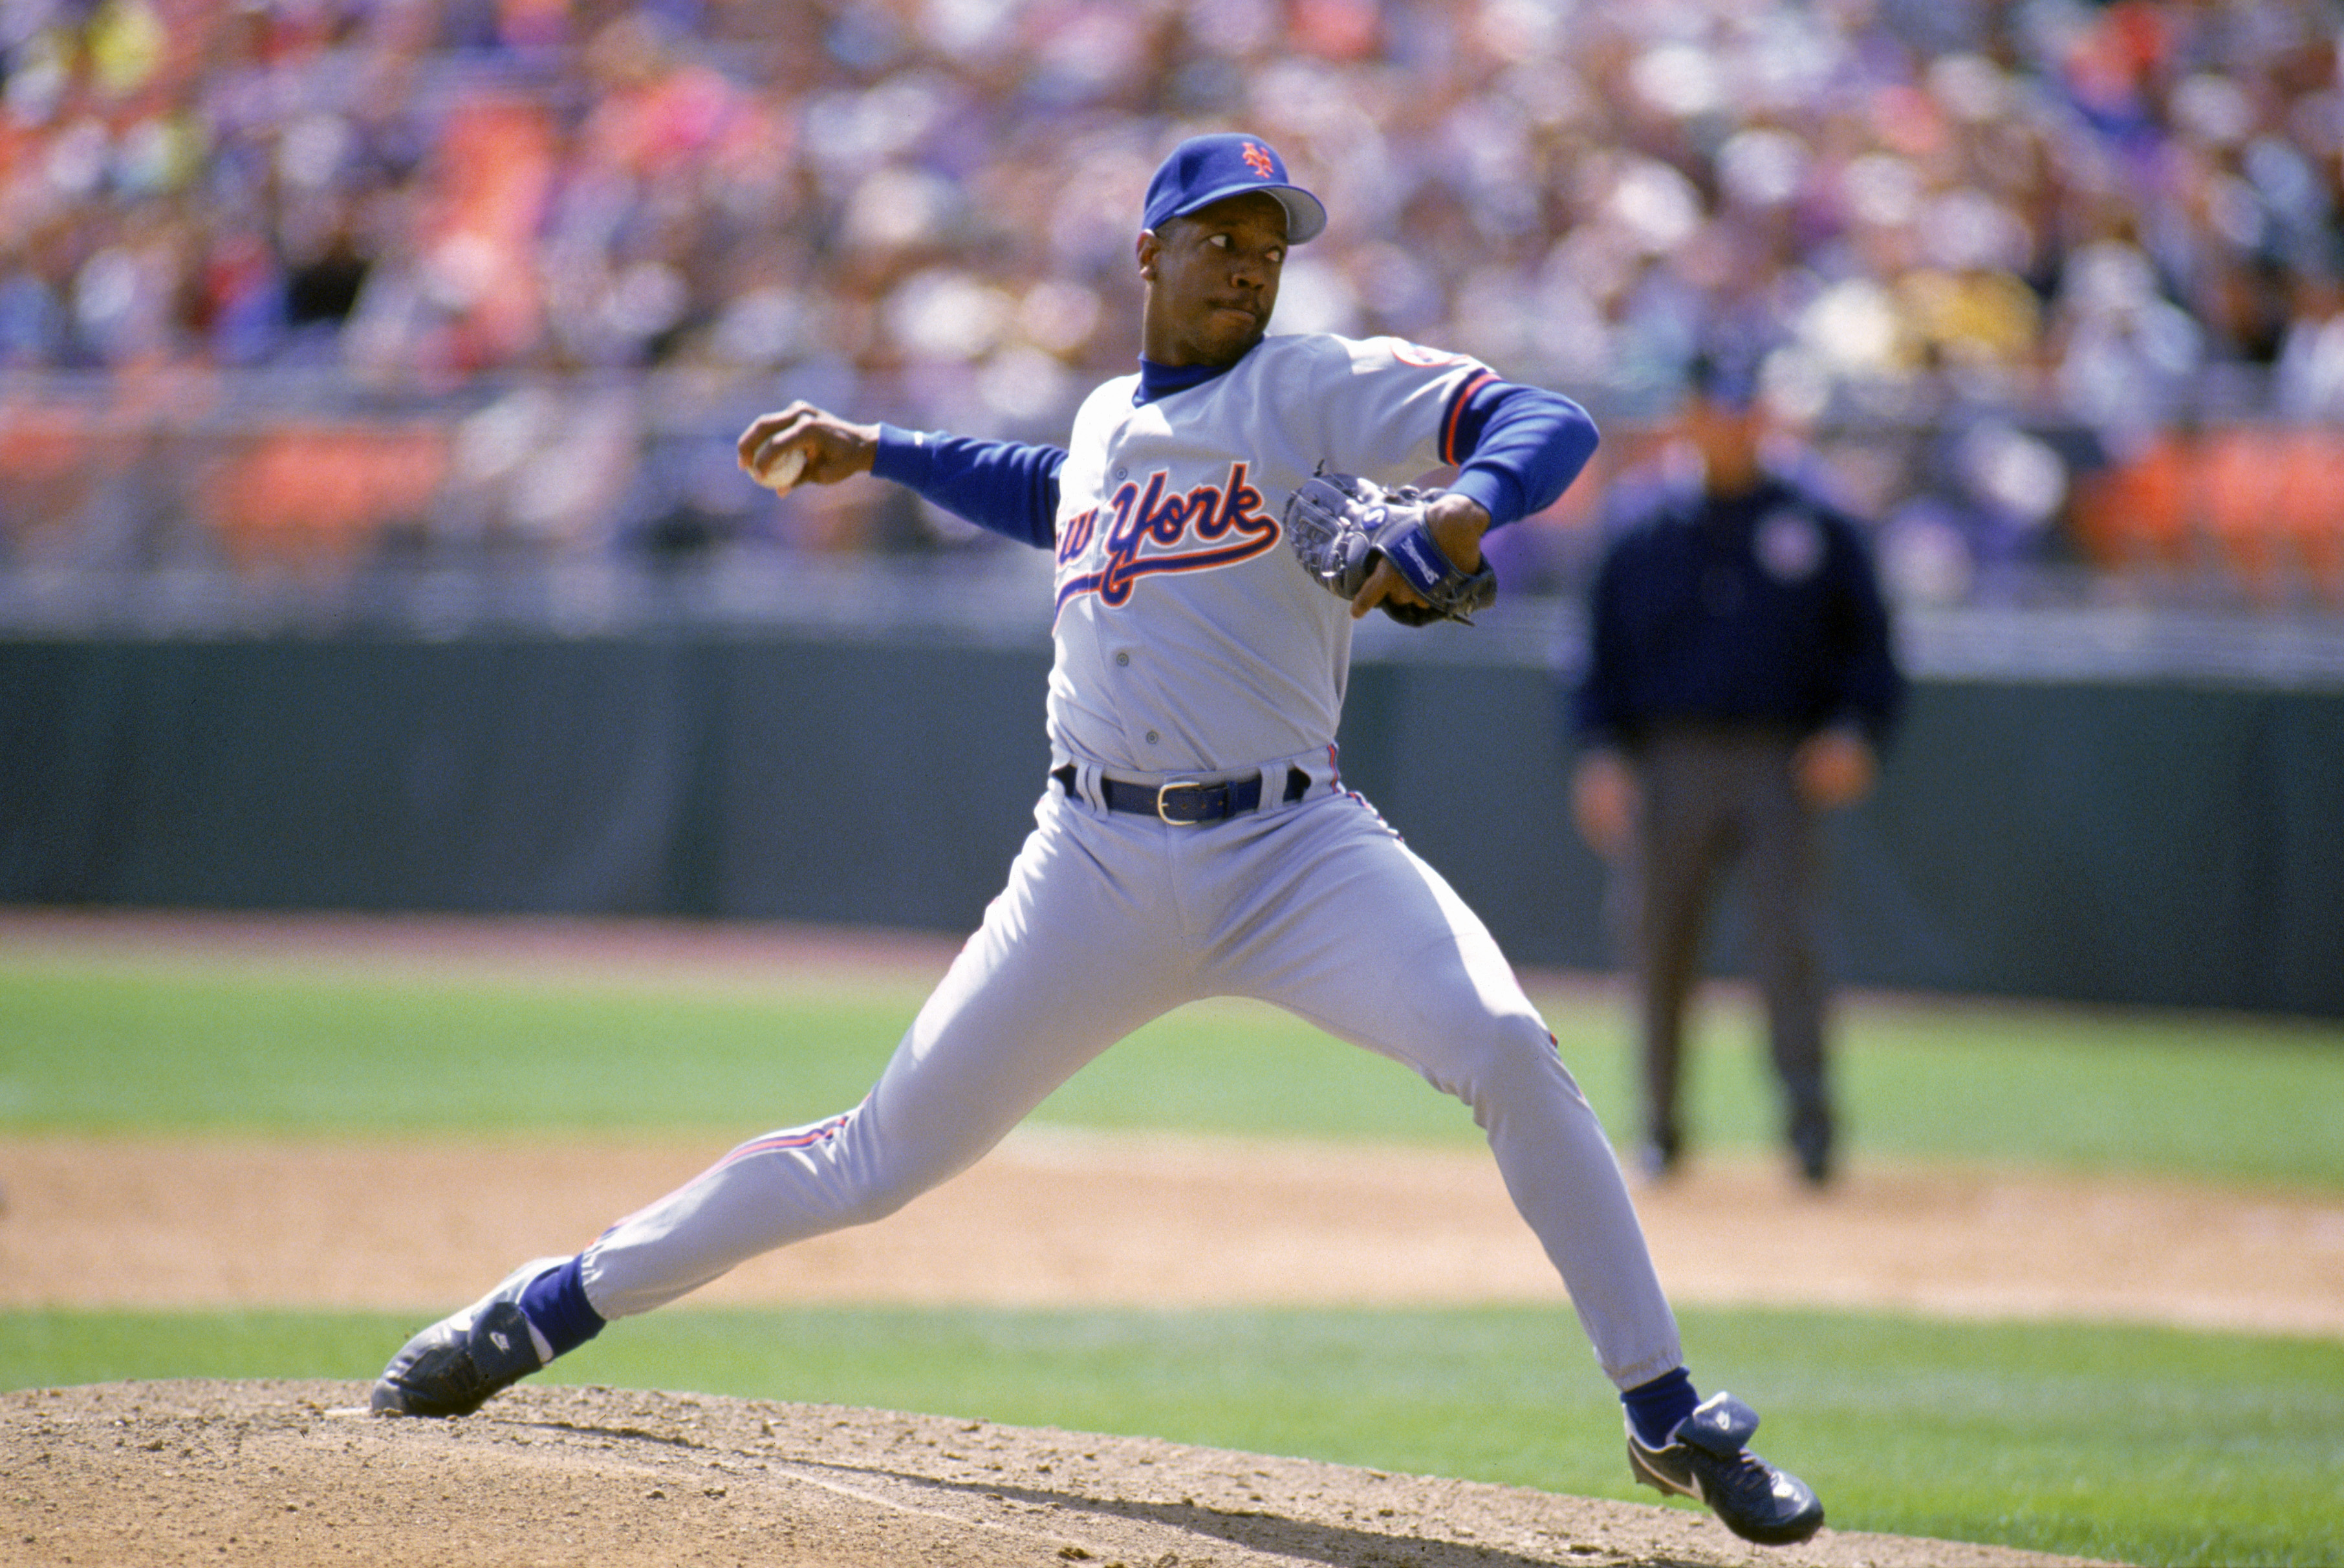 Dwight Gooden Signed Mets Pitching White Jersey Windup 8x10 Photo